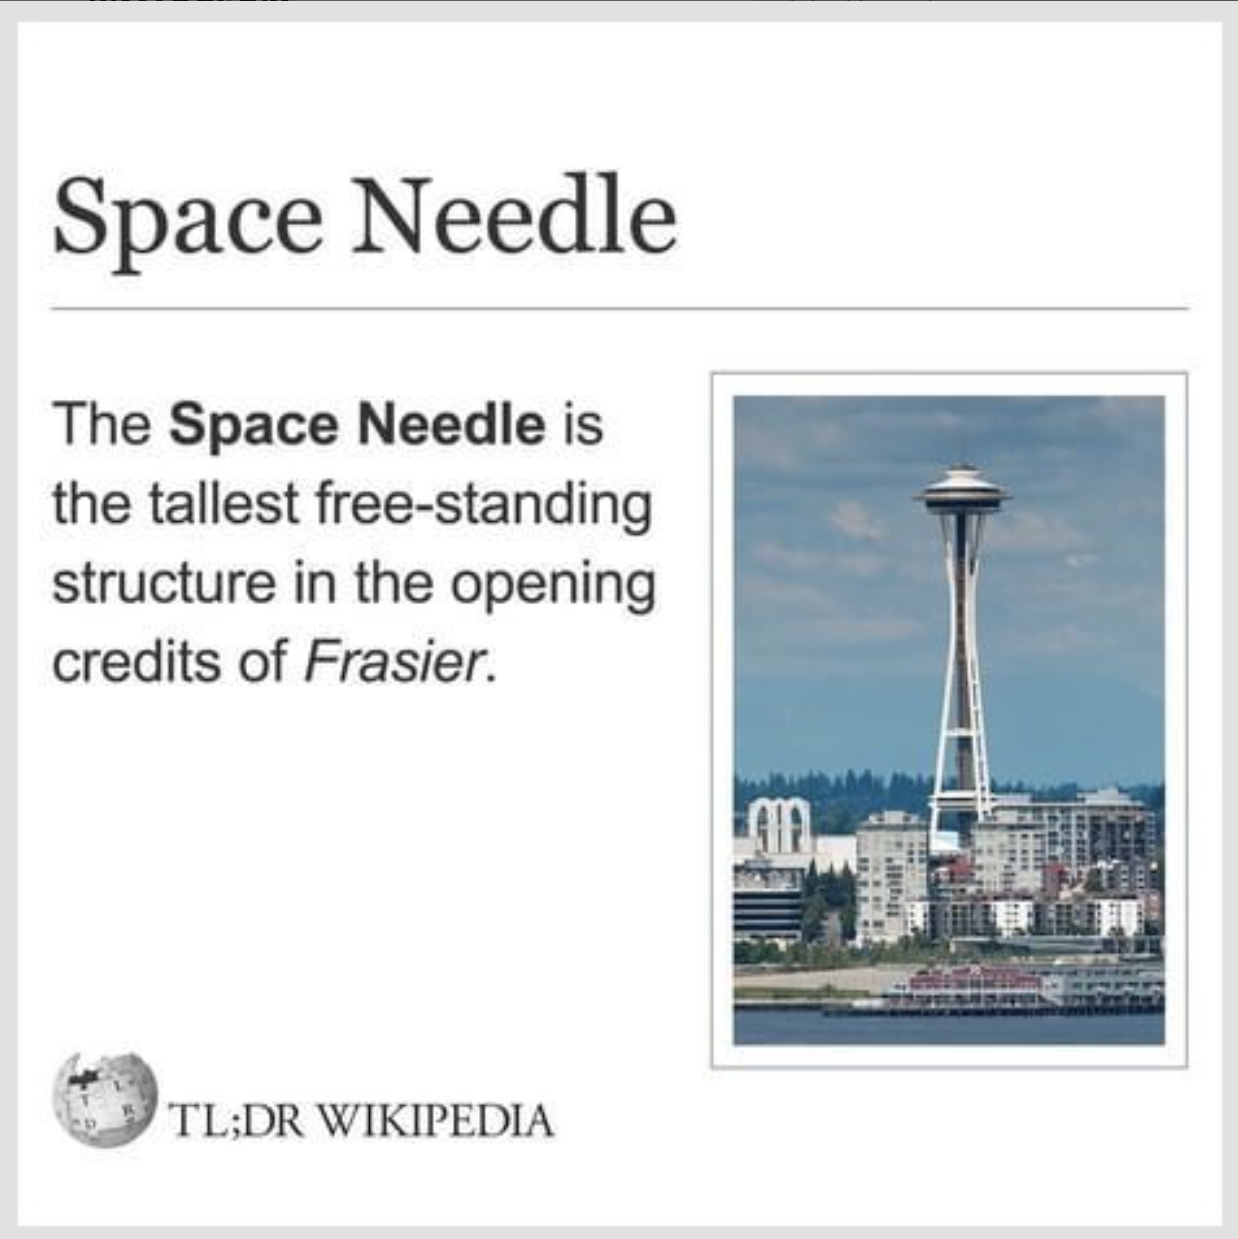 Wikipedia Memes - space needle - Space Needle The Space Needle is the tallest freestanding structure in the opening credits of Frasier. Tl;Dr Wikipedia